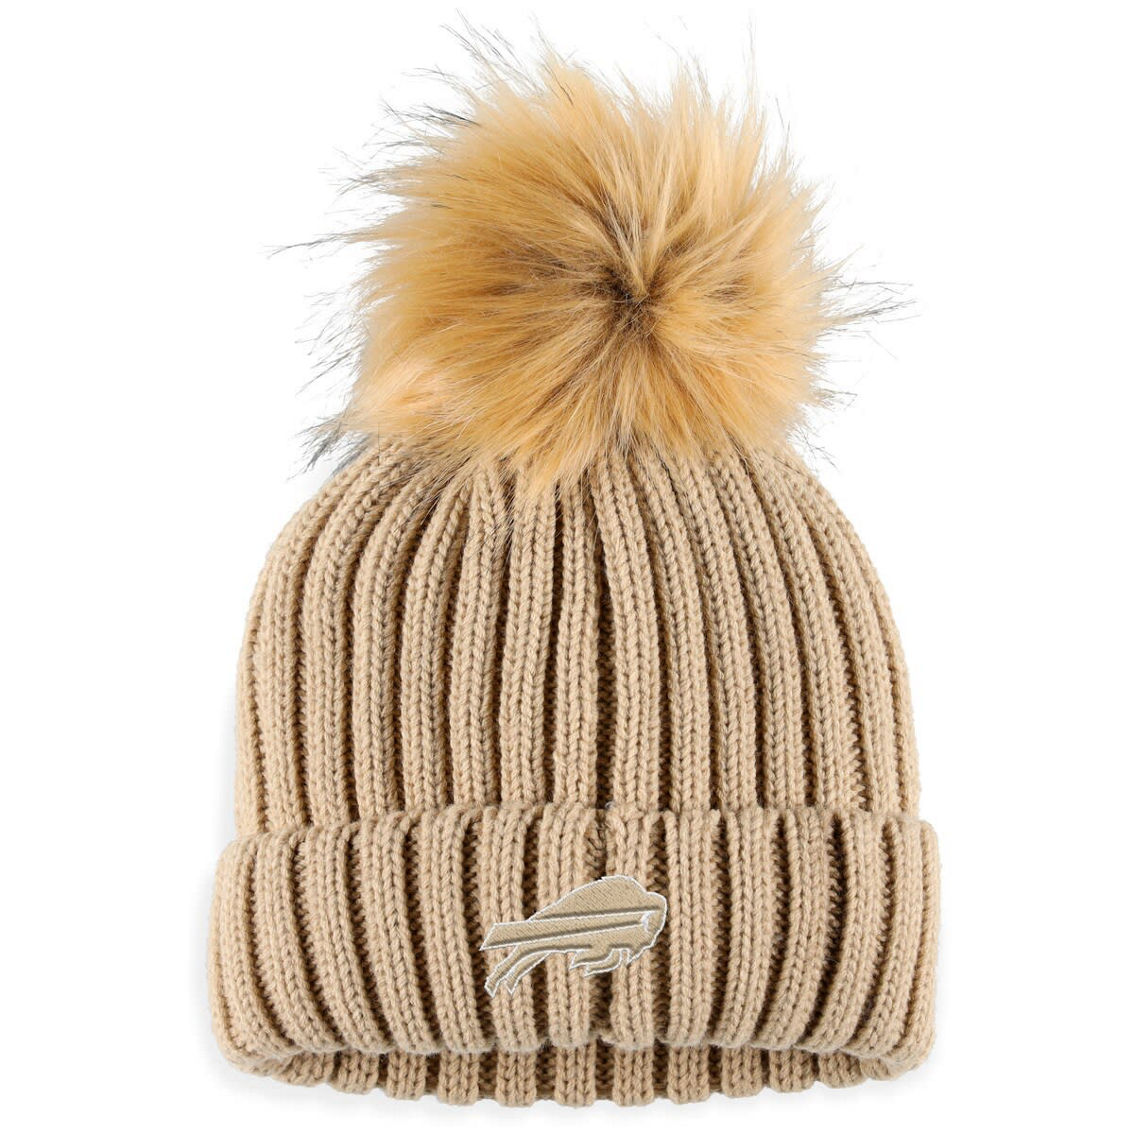 WEAR by Erin Andrews Women's Natural Buffalo Bills Neutral Cuffed Knit Hat with Pom - Image 2 of 3